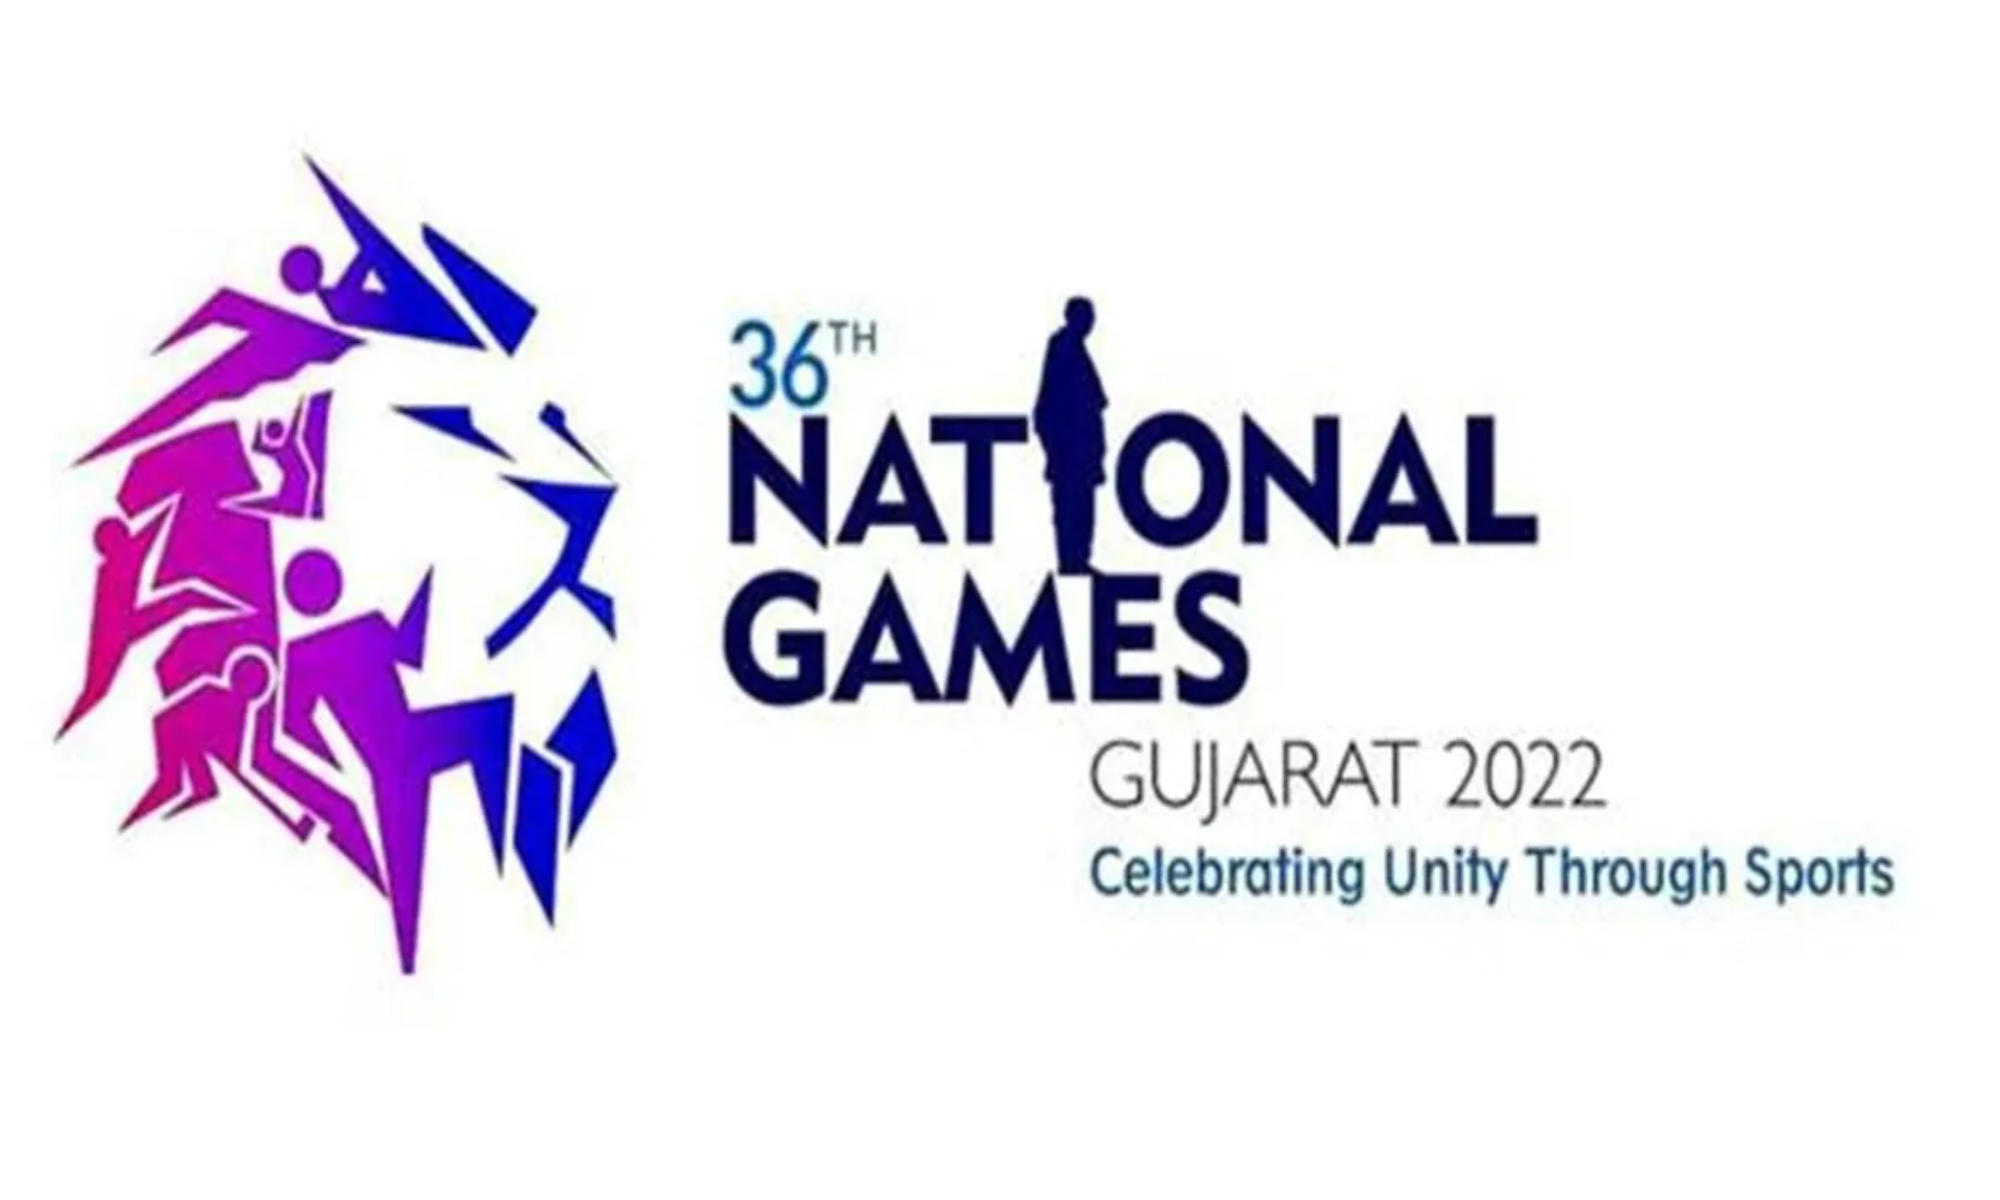 National Games 2022: Check All important updates, Venue, Schedule and history